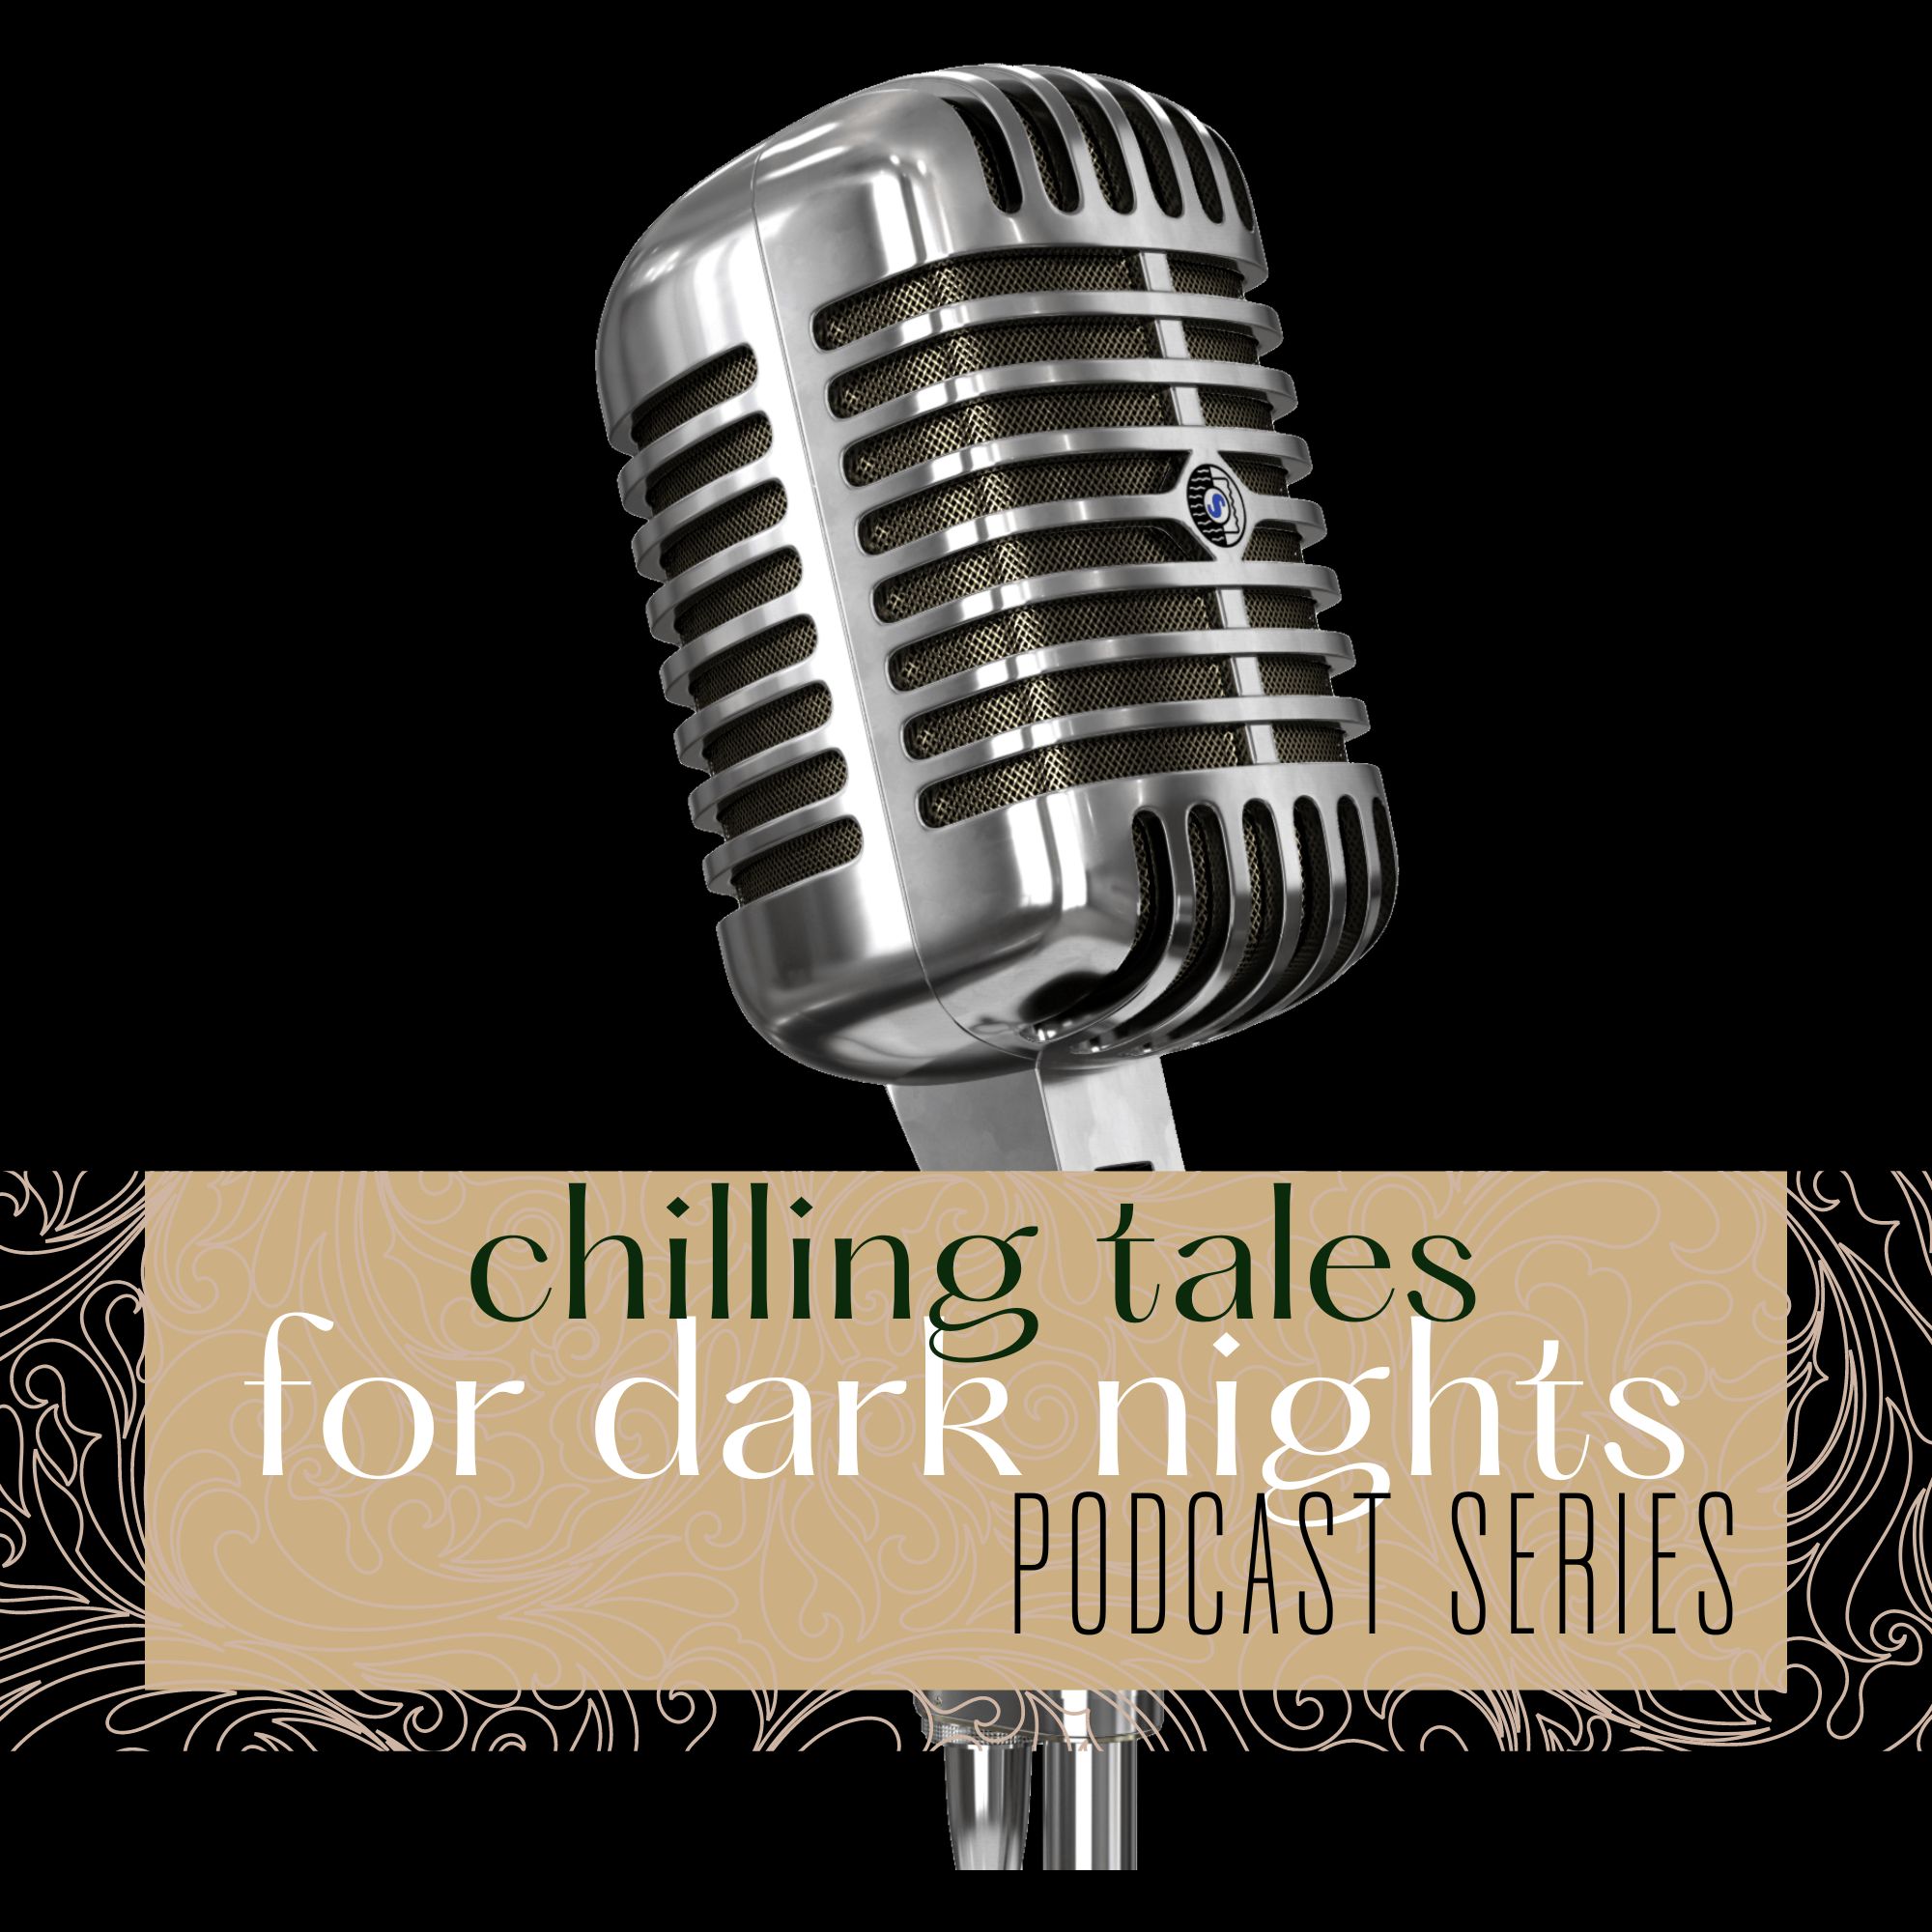 I’m Sharing a Podcast Series: Chilling Tales for Dark Nights